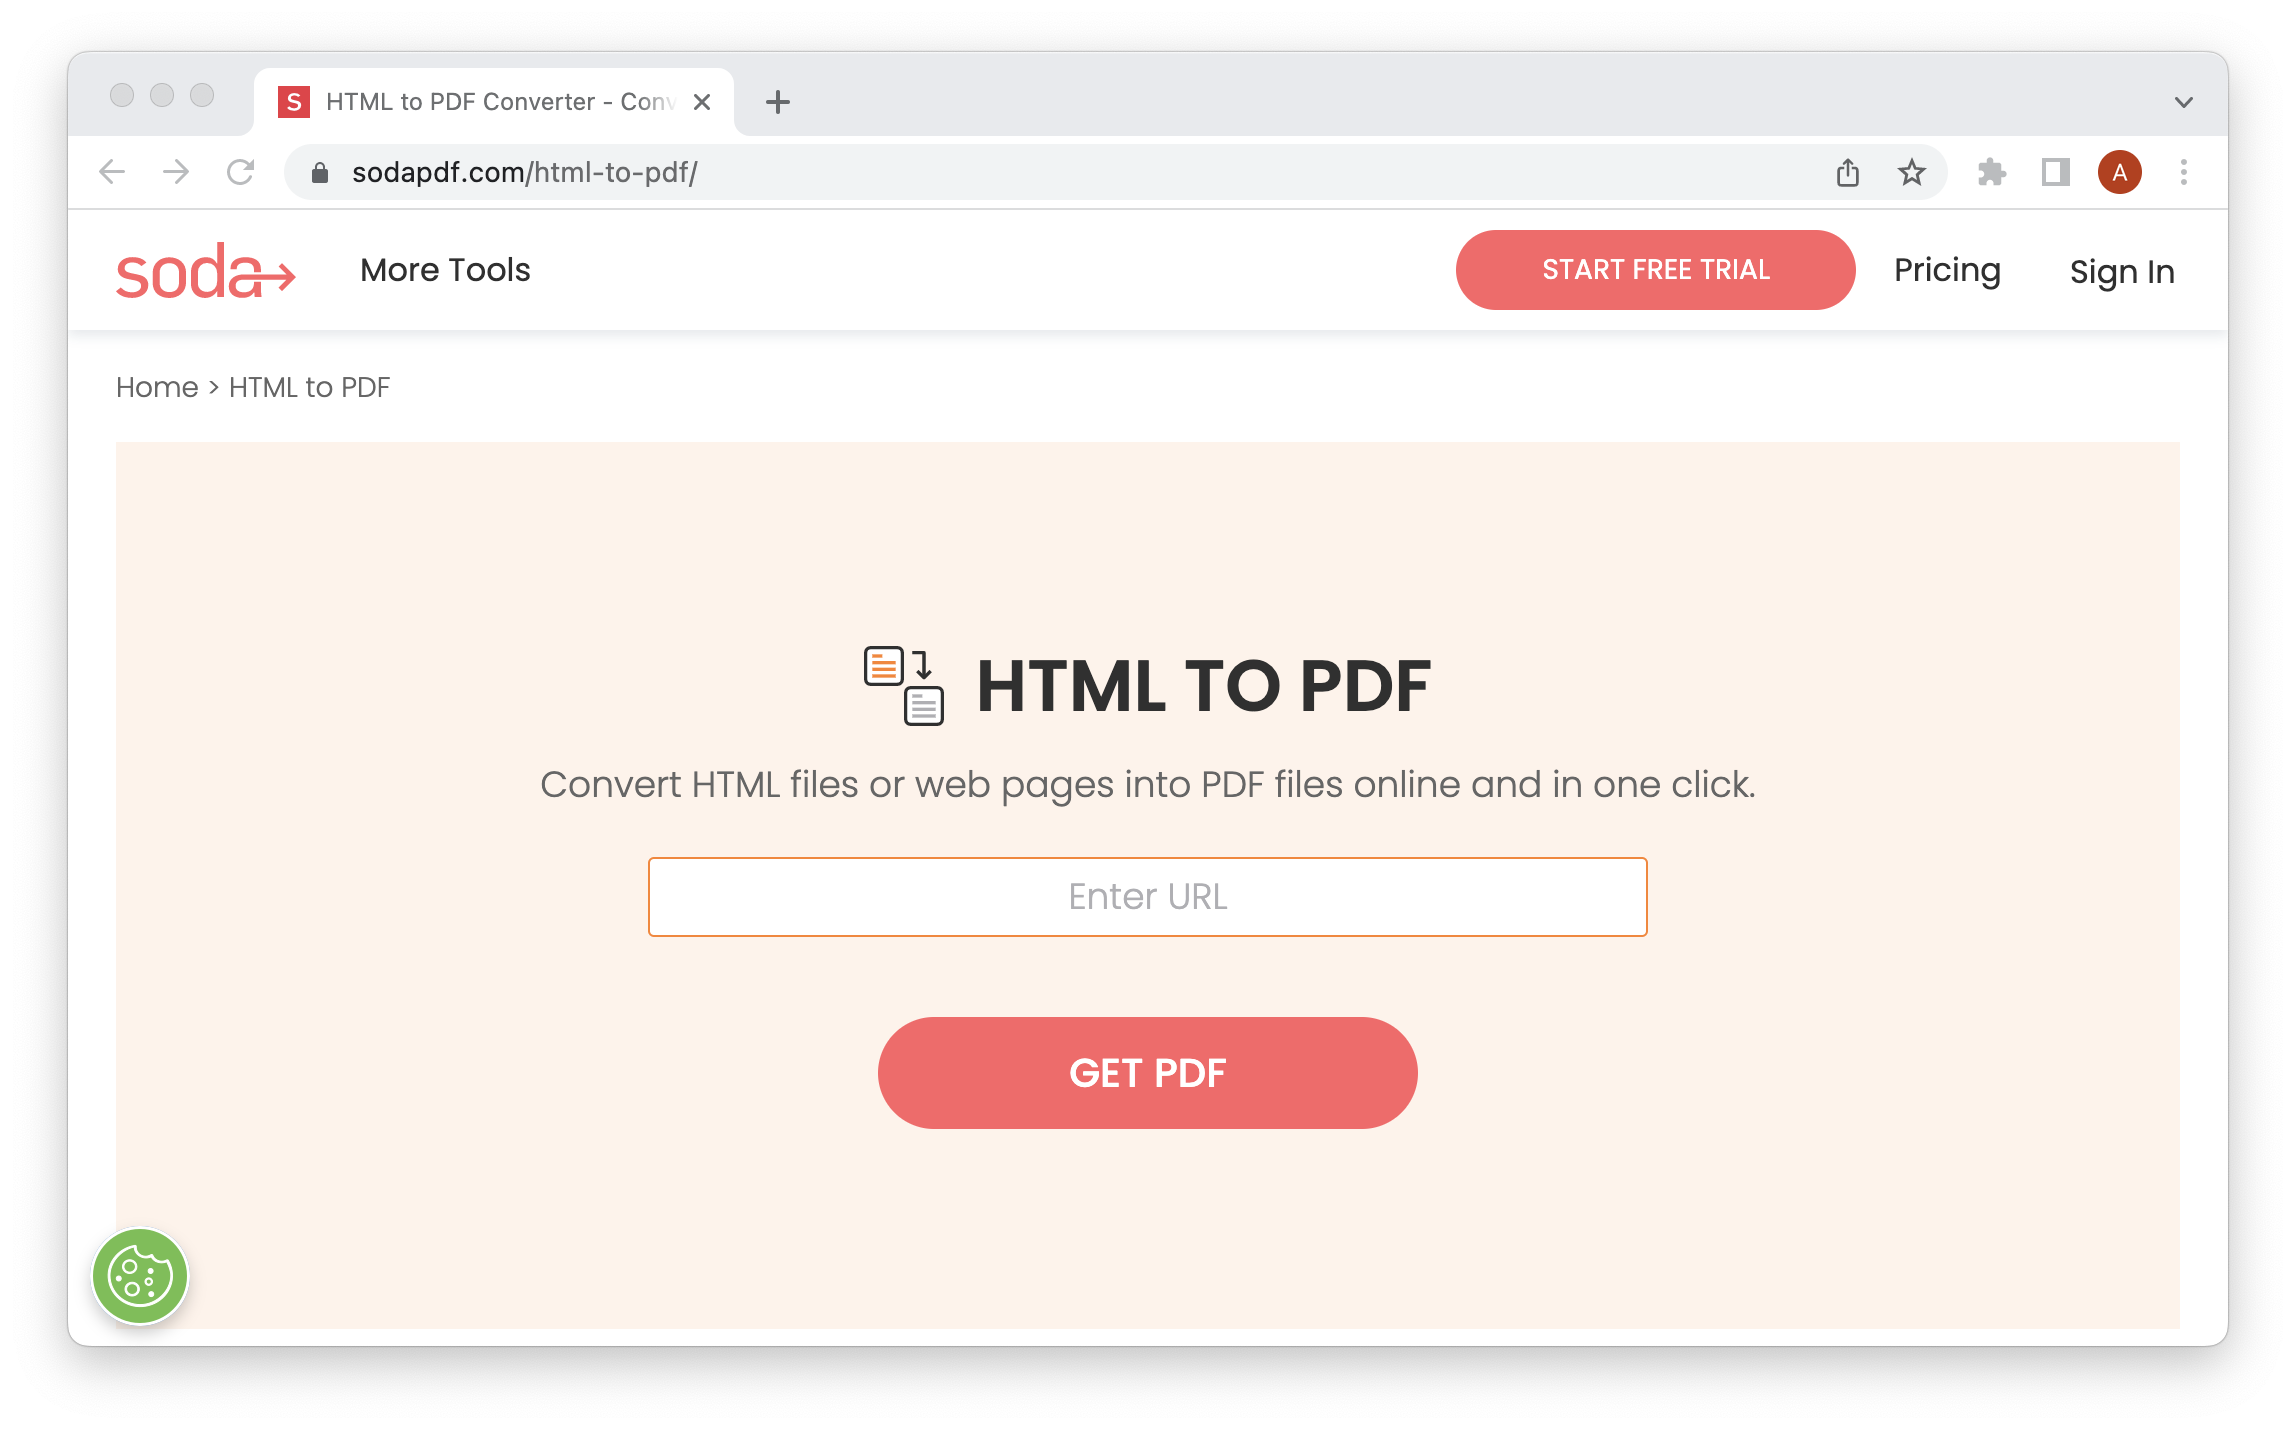 SodaPDF is an example of a HTML to PDF Converter